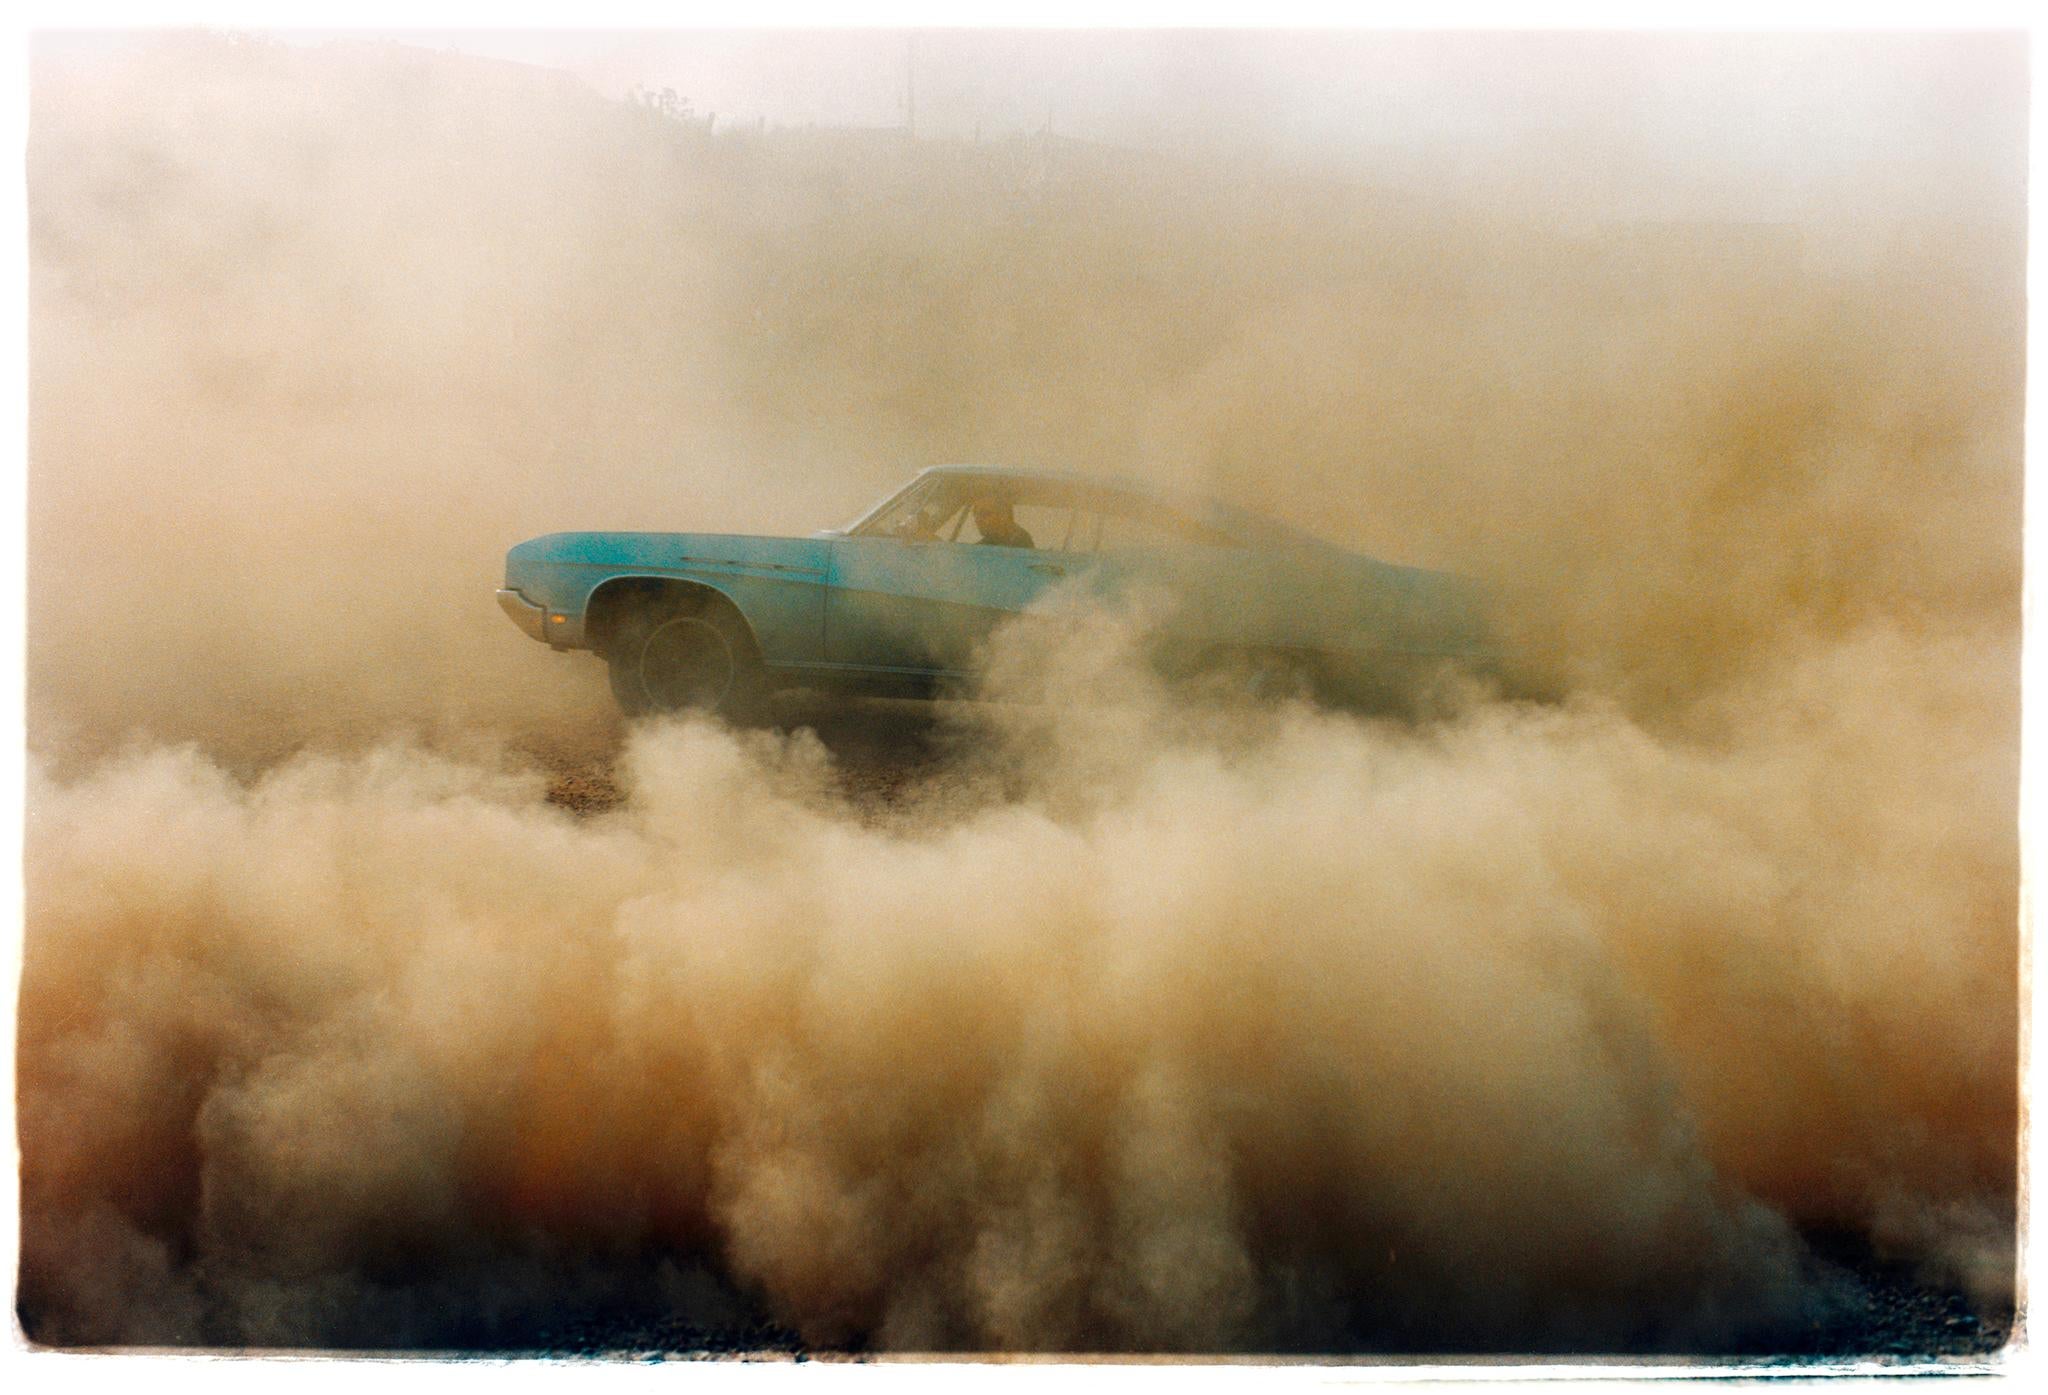 Buick in the Dust, Hemsby, Norfolk - Set of Four Framed Car Photographs - Contemporary Print by Richard Heeps